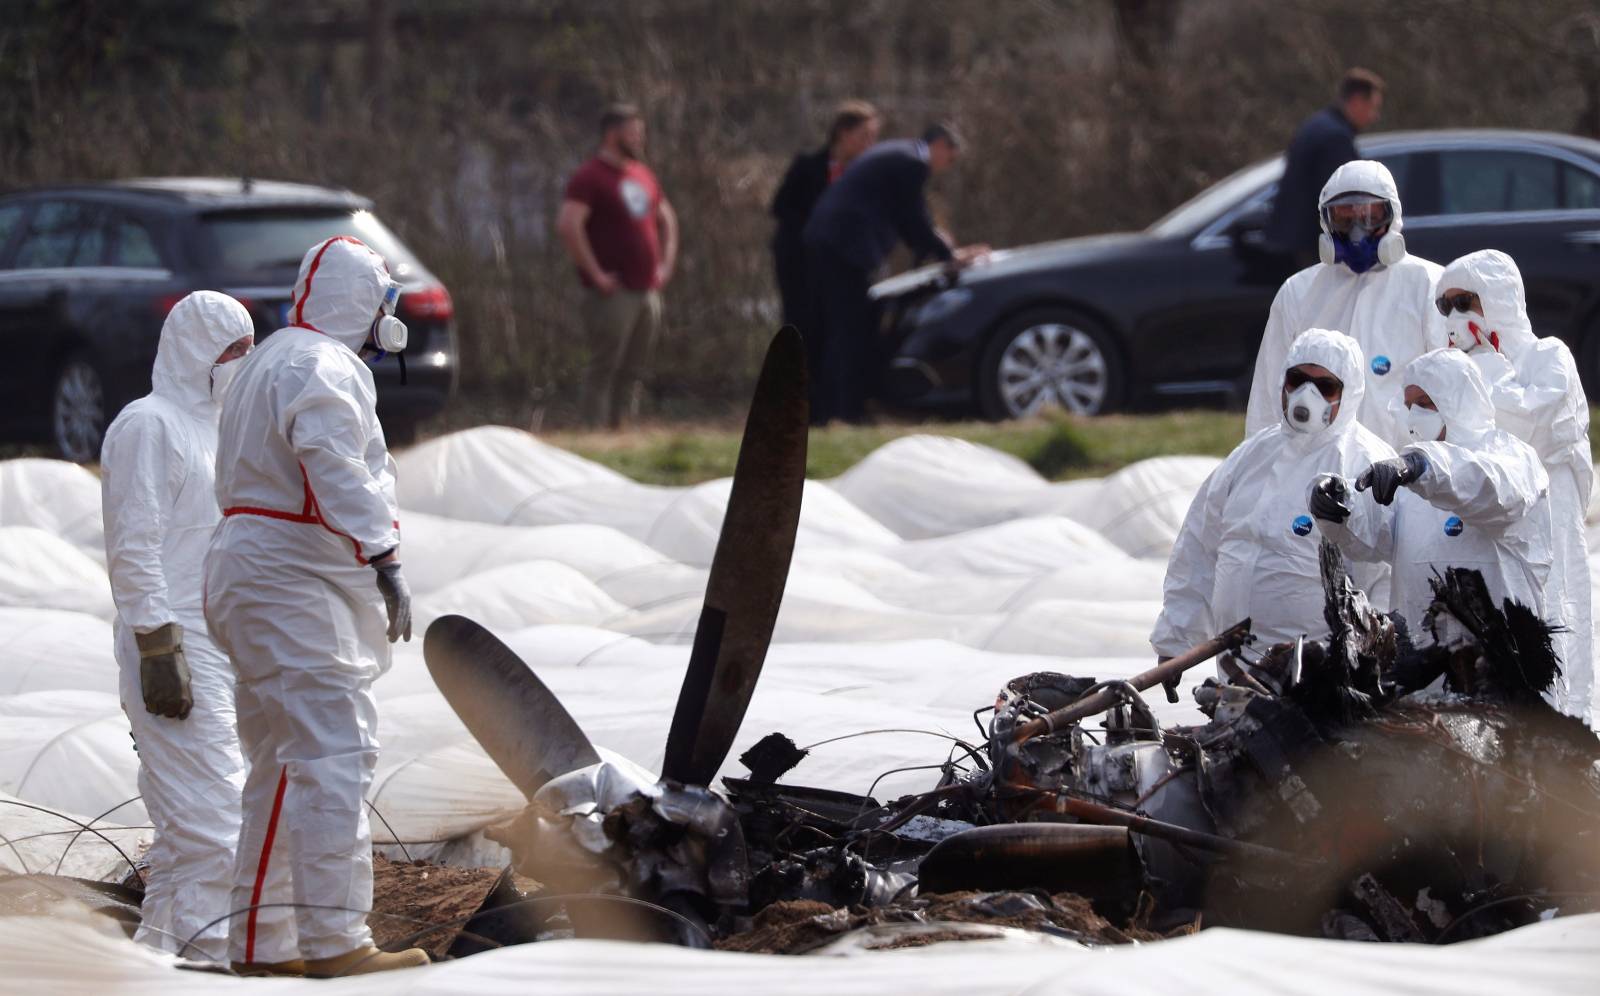 Experts from Germany and Russia inspect the wreckage of an Epic1000 plane in which Natalia Fileva, co-owner and chairwoman of Russia's second largest airline S7, was killed after the plane crashed in Erzhausen near Frankfurt